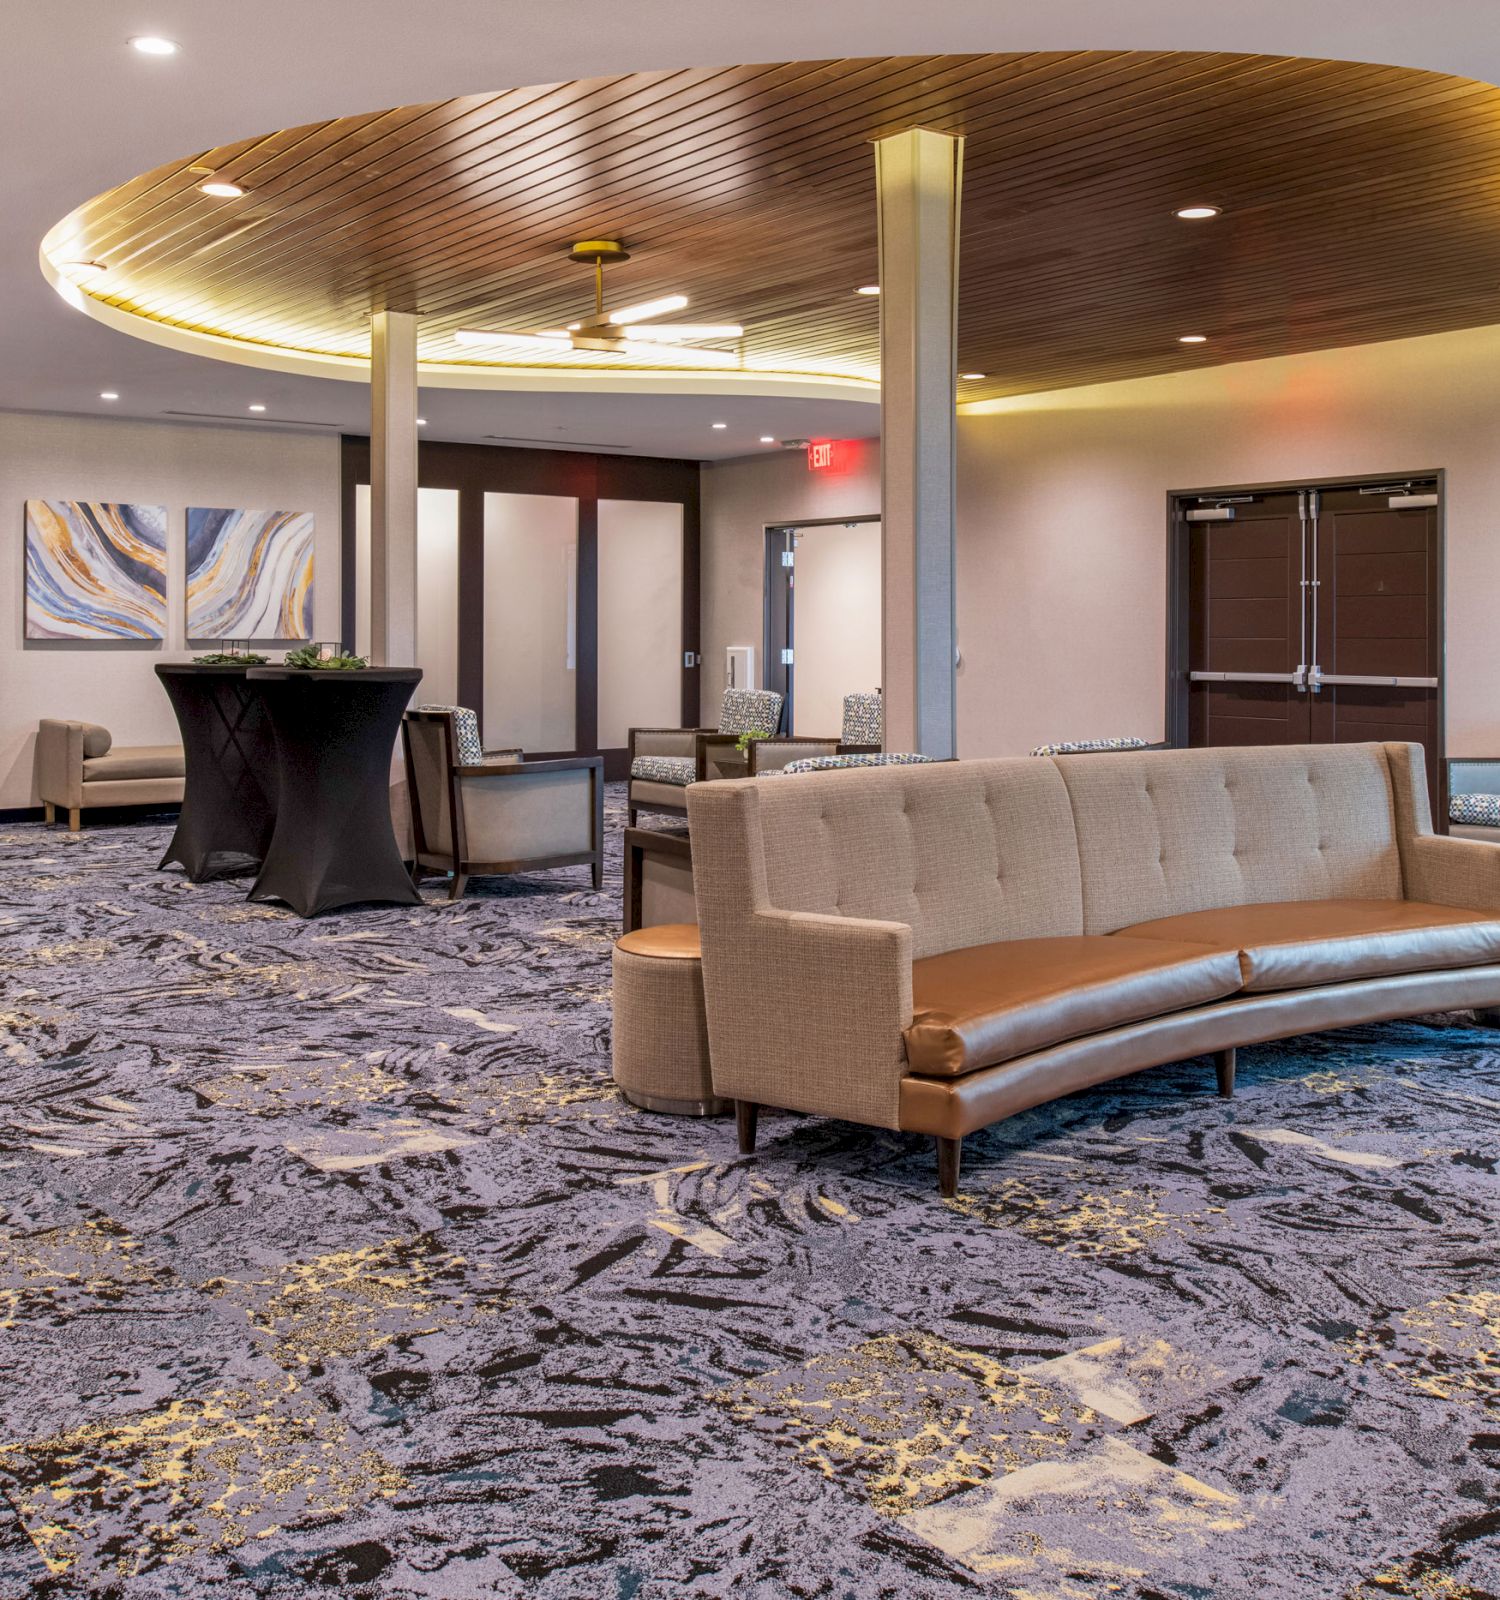 A modern lounge area with stylish furniture, decorative lighting, abstract artwork, and blue patterned carpet, creating a welcoming atmosphere.